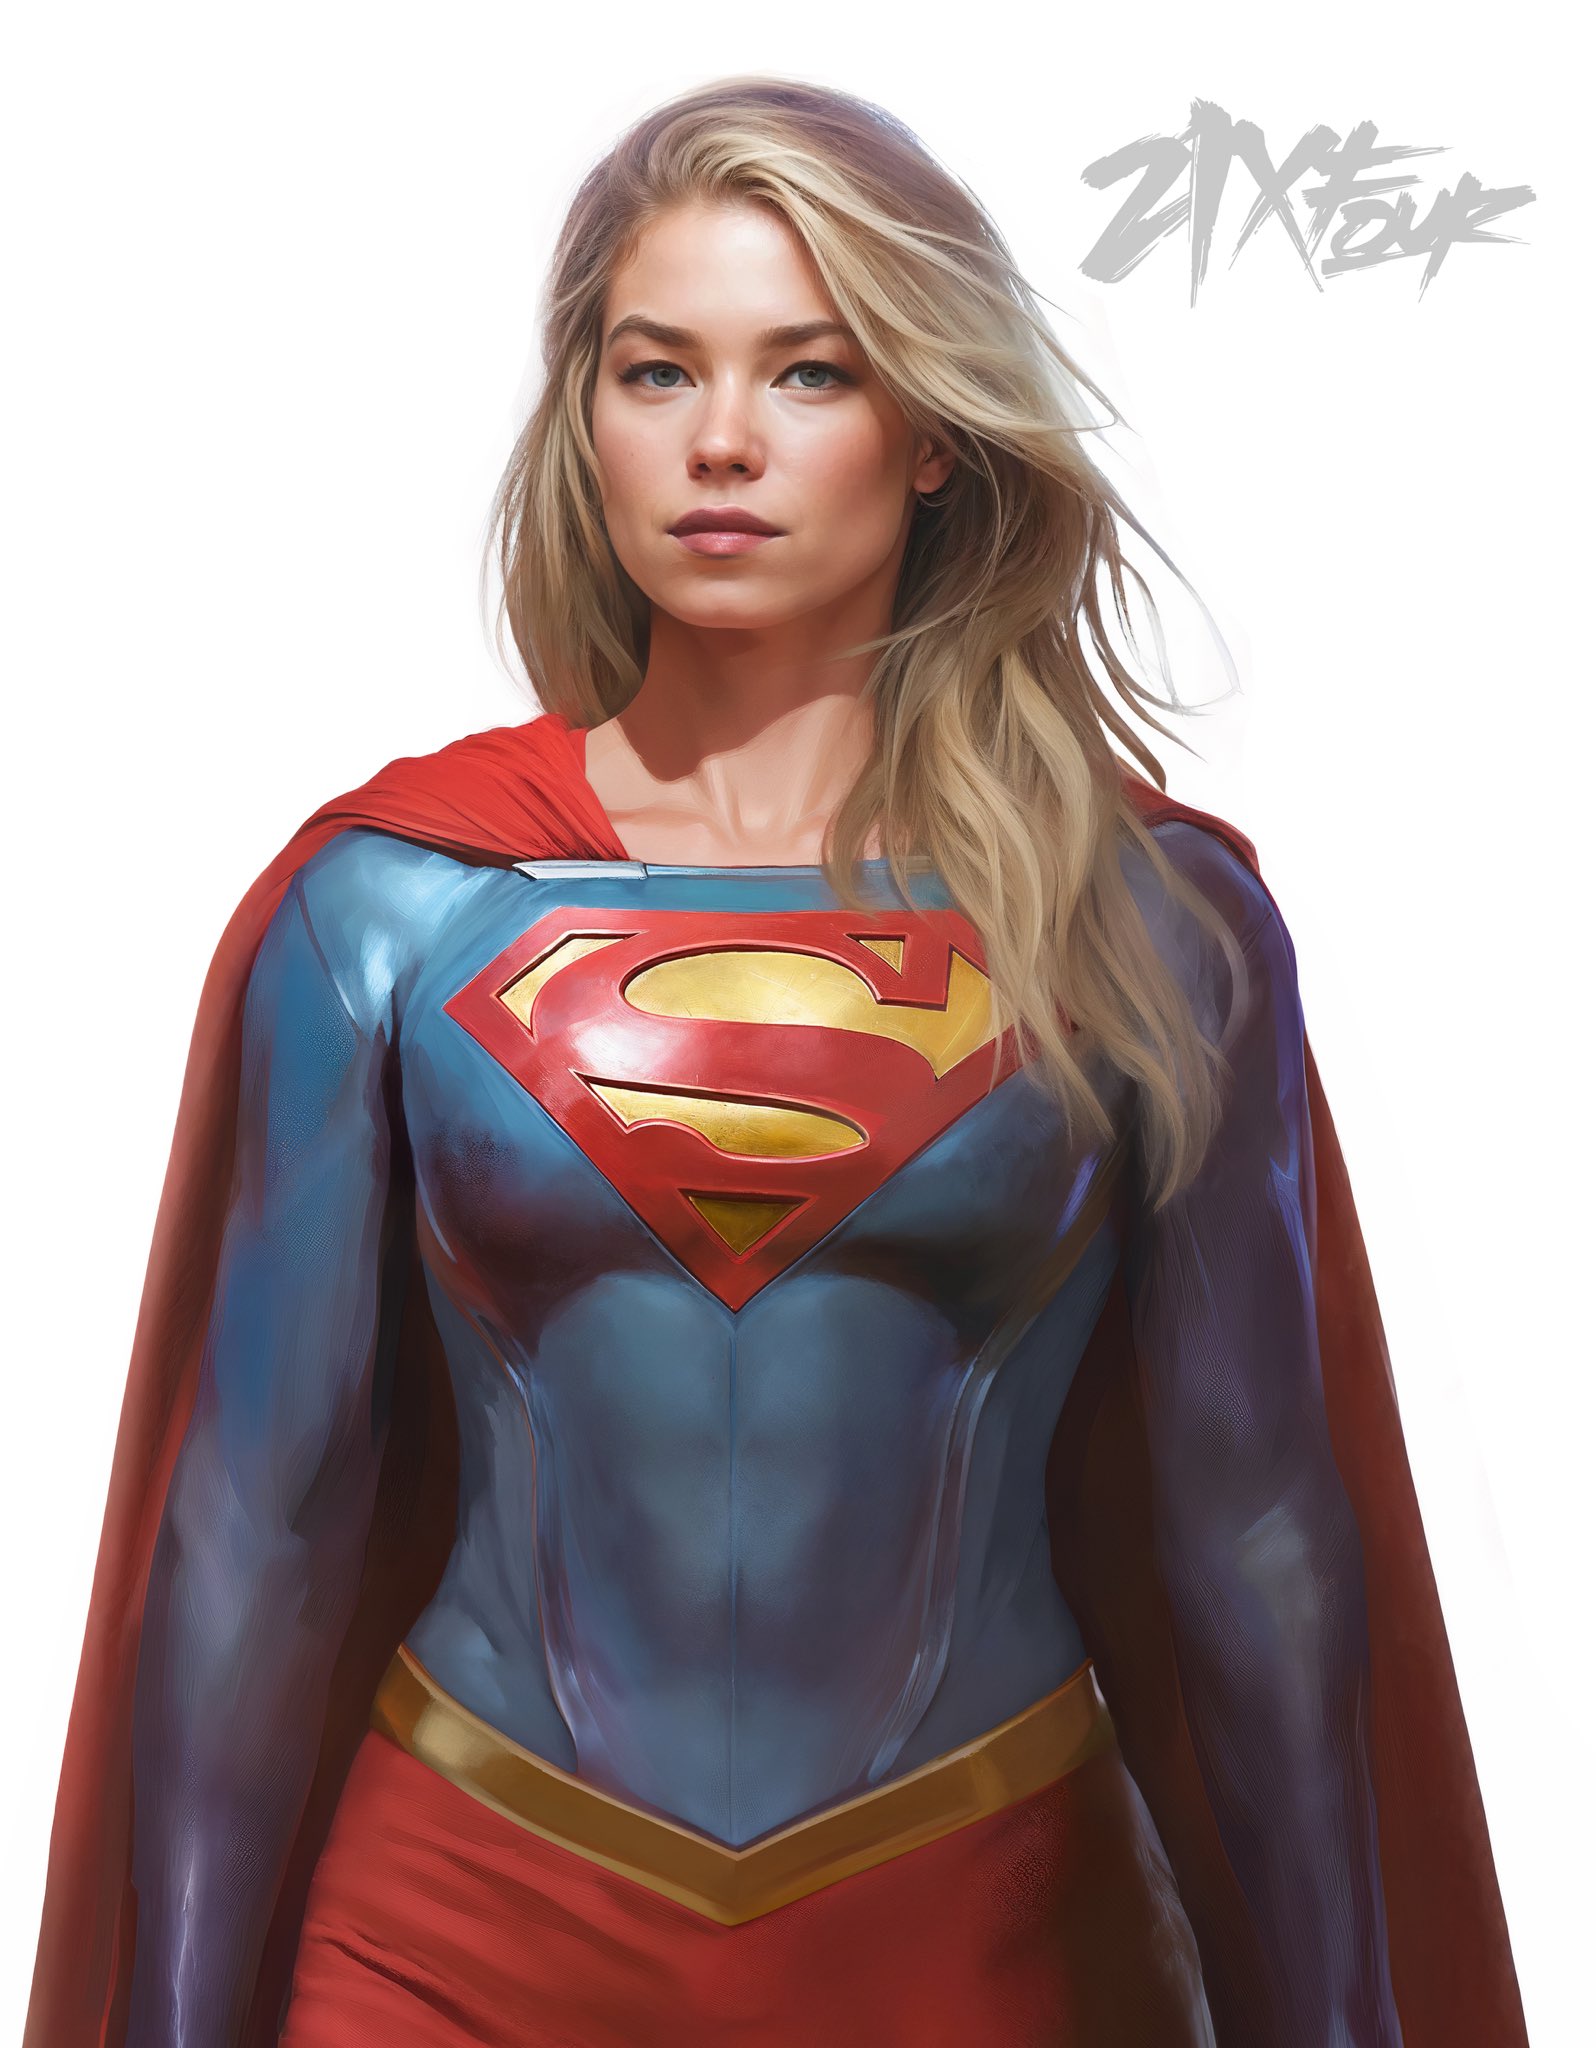 Milly Alcock, Supergirl